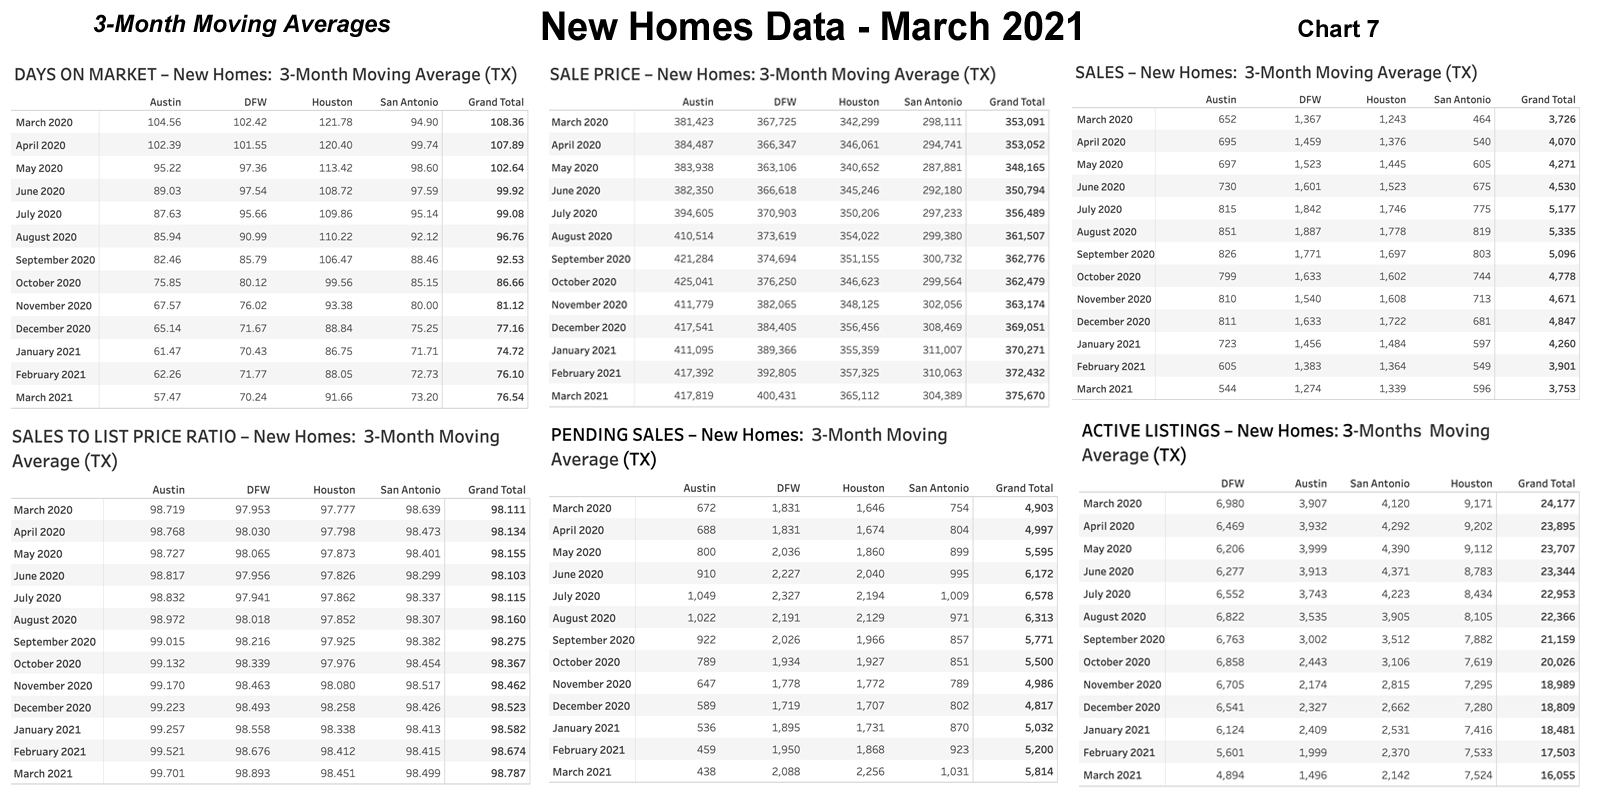 Chart 7: Texas 3-Month Moving Averages – New Homes - March 2021